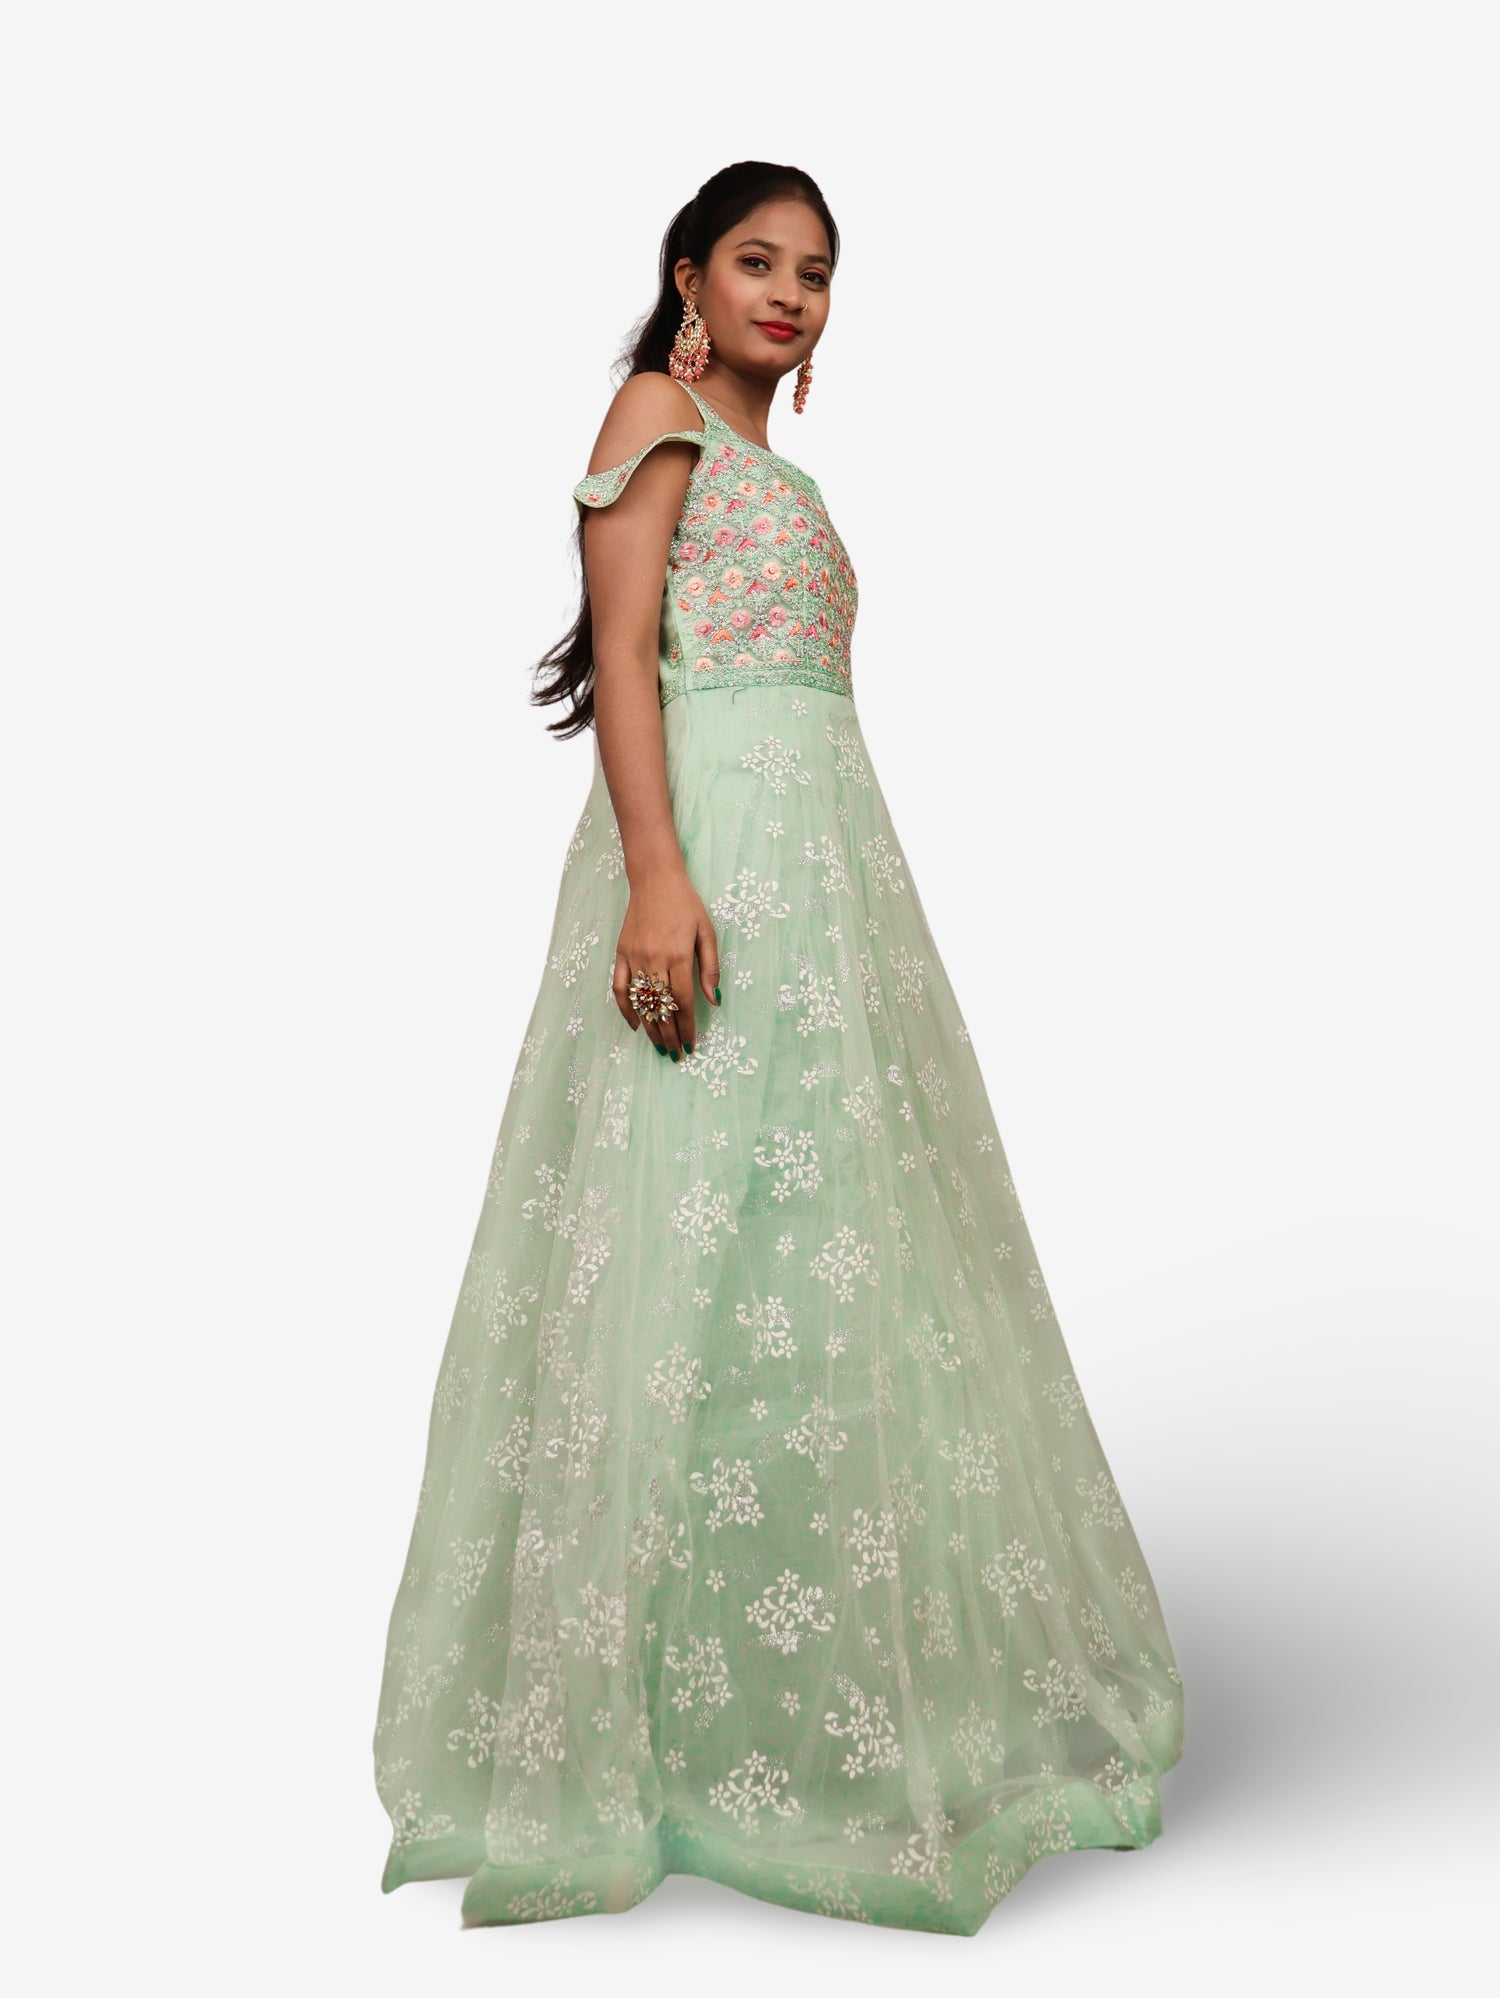 Gown with Stone Work &amp; Embroidery by Shreekama Pista Green Designer Gowns for Party Festival Wedding Occasion in Noida